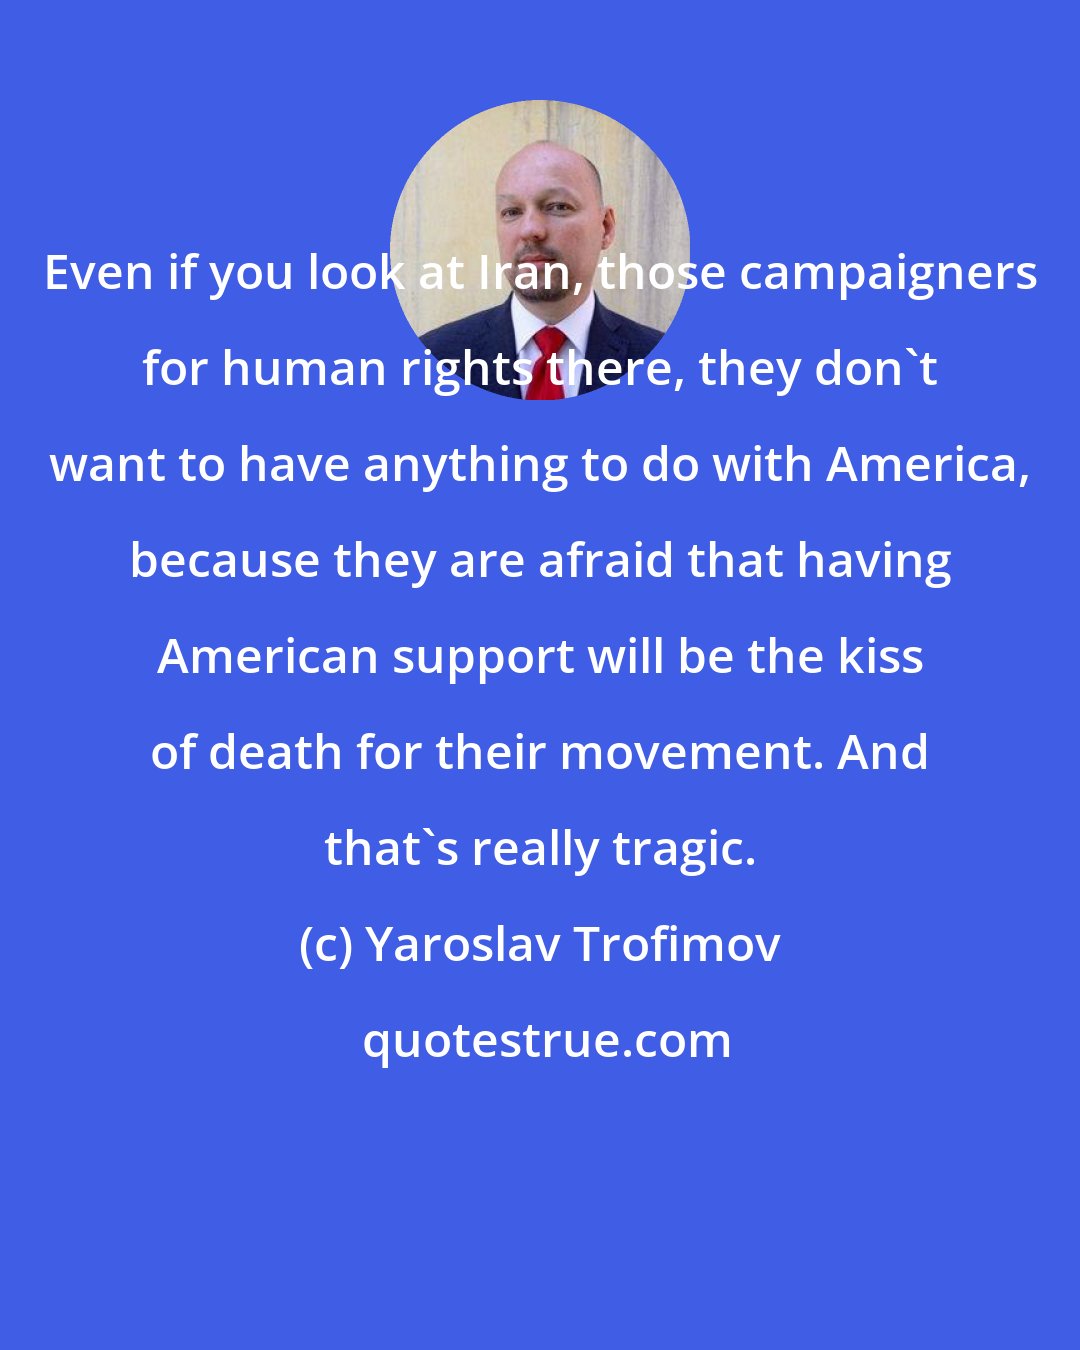 Yaroslav Trofimov: Even if you look at Iran, those campaigners for human rights there, they don't want to have anything to do with America, because they are afraid that having American support will be the kiss of death for their movement. And that's really tragic.